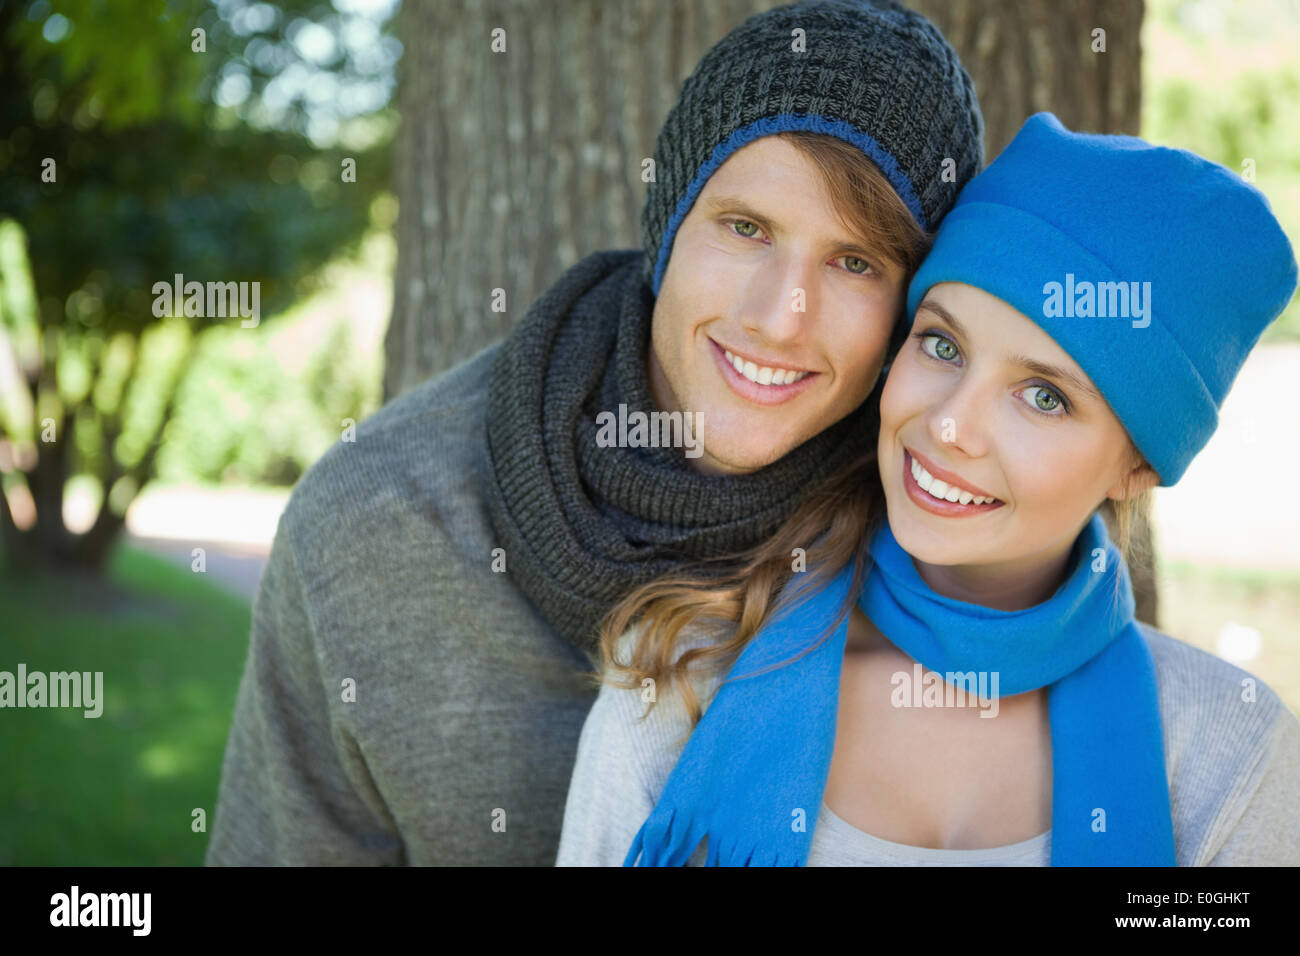 Cute couple smiling at camera in hats and scarves Stock Photo